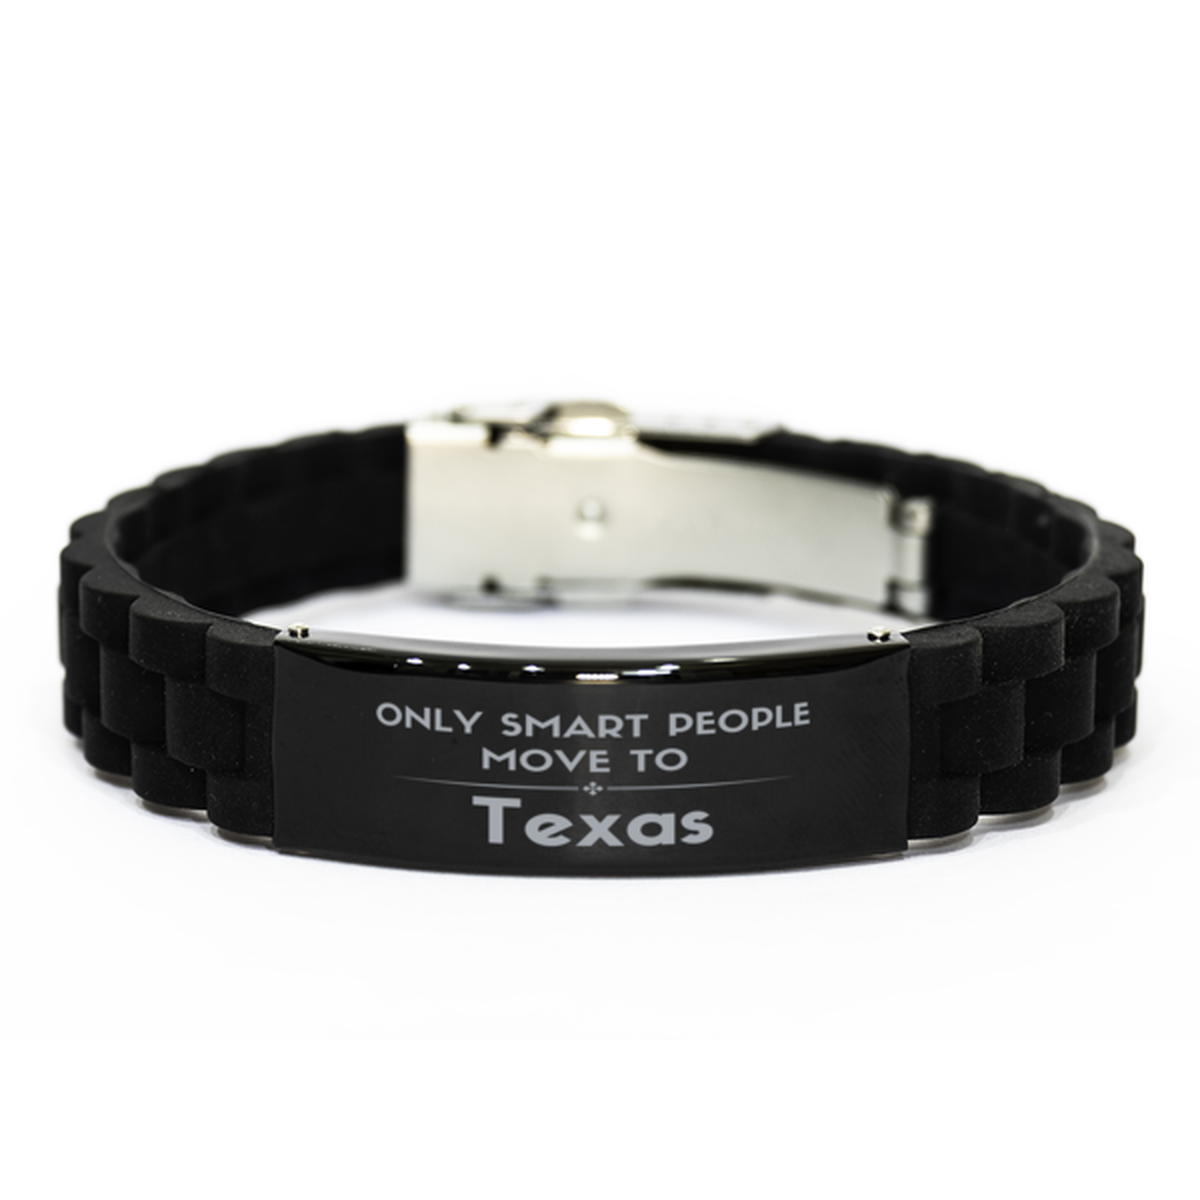 Only smart people move to Texas Black Glidelock Clasp Bracelet, Gag Gifts For Texas, Move to Texas Gifts for Friends Coworker Funny Saying Quote